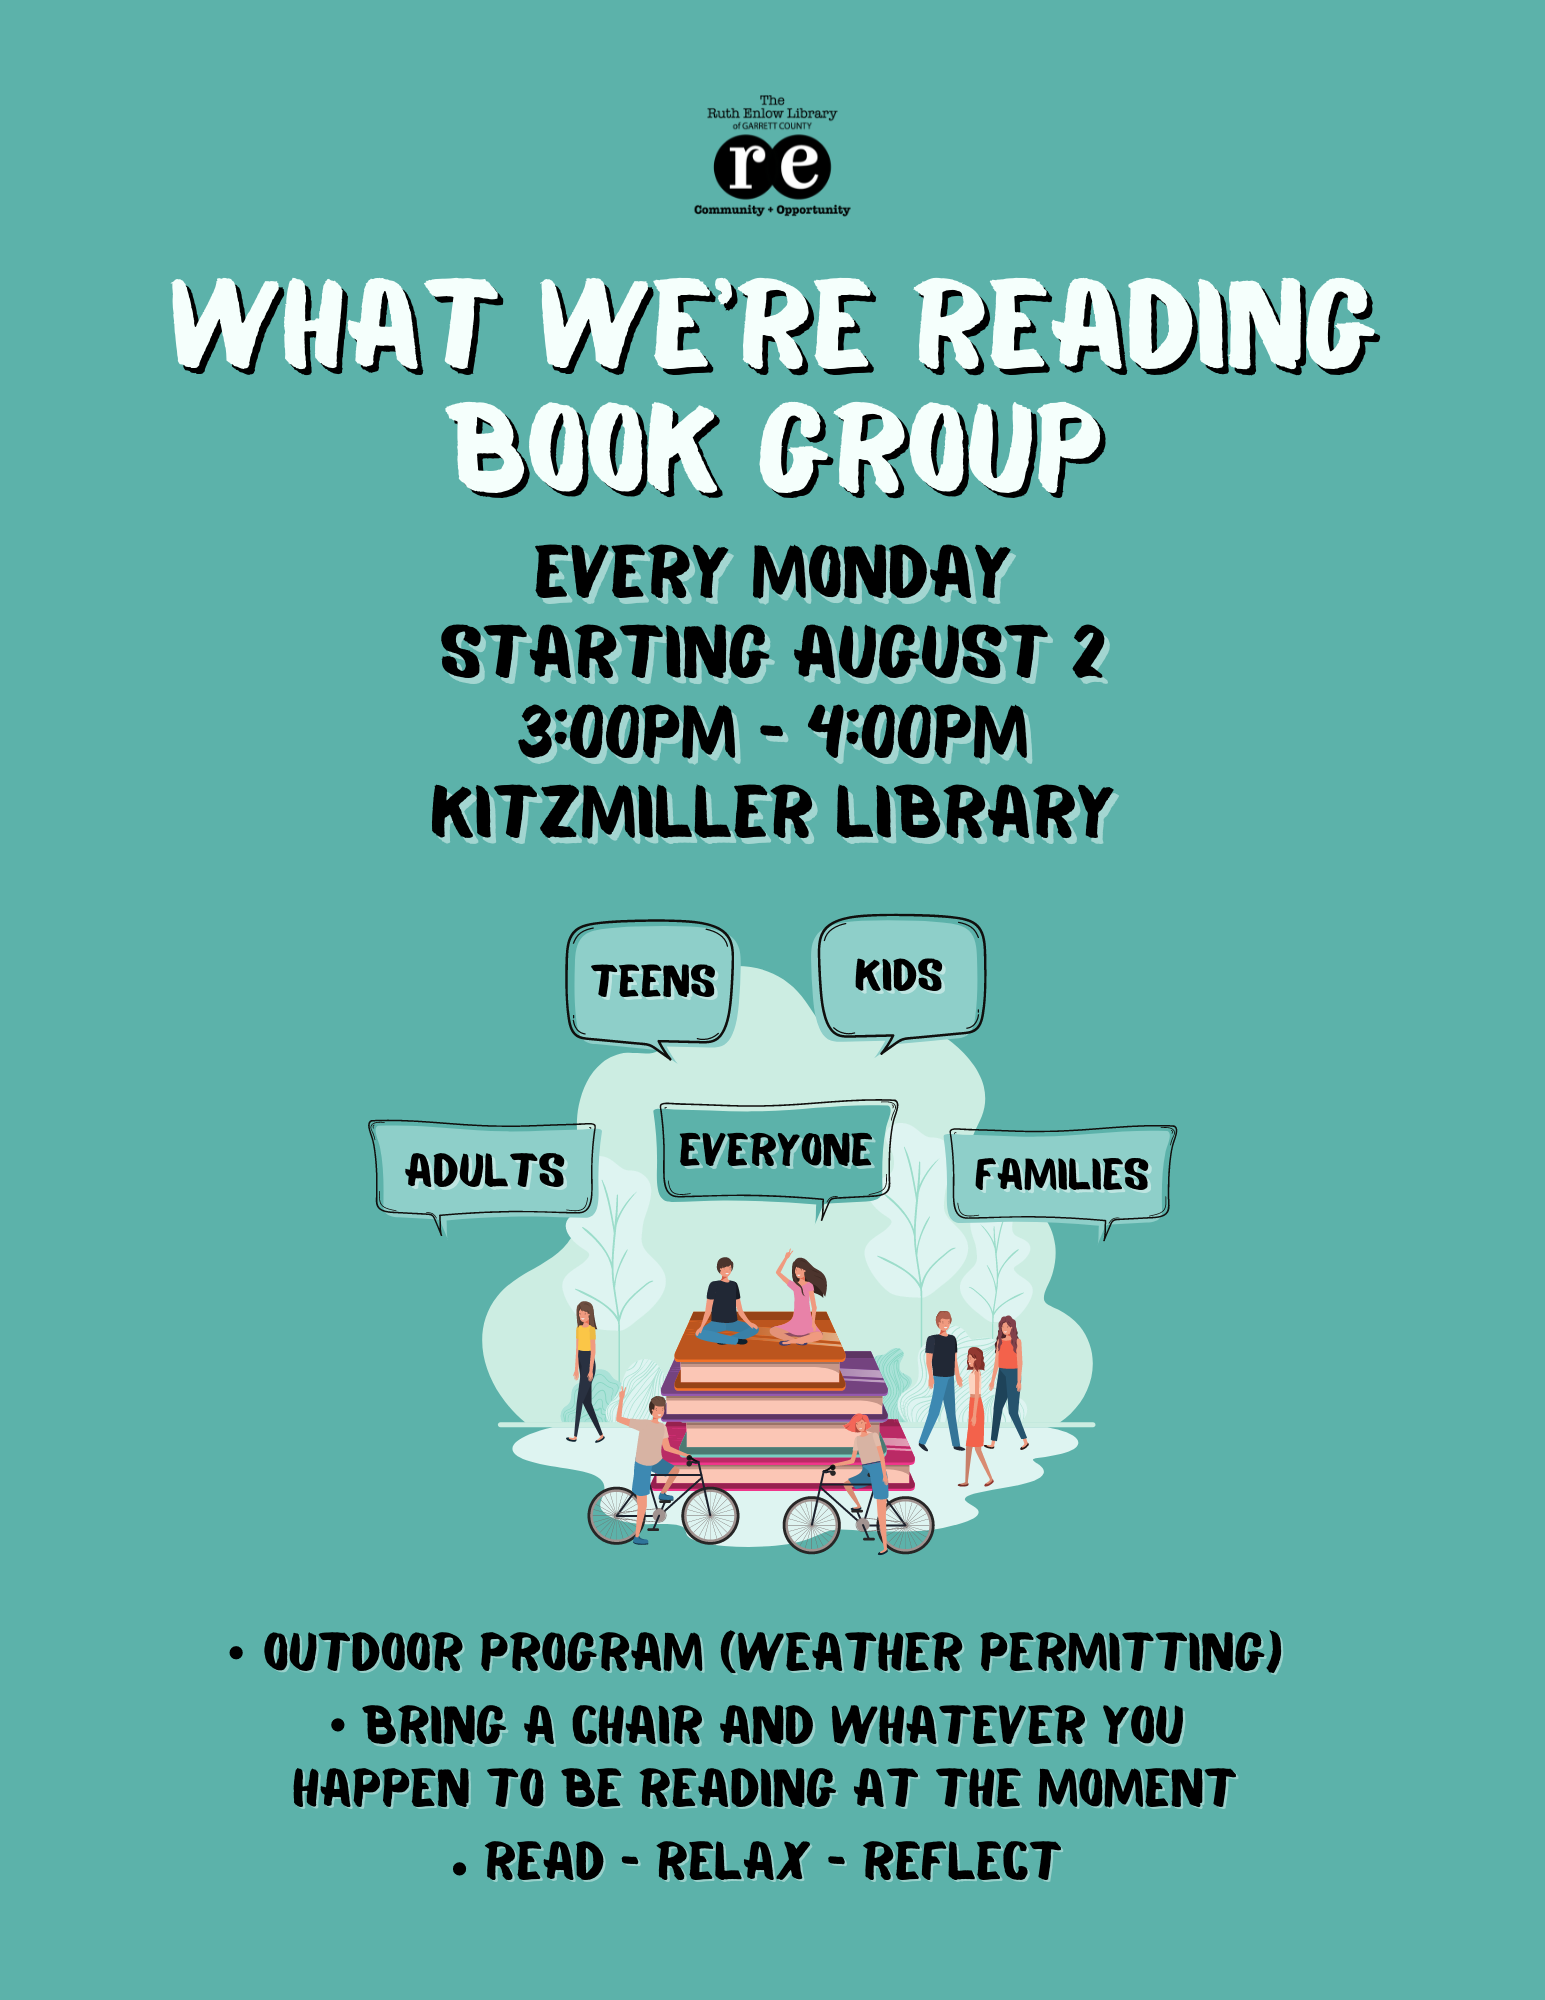 What We're Reading Book Group